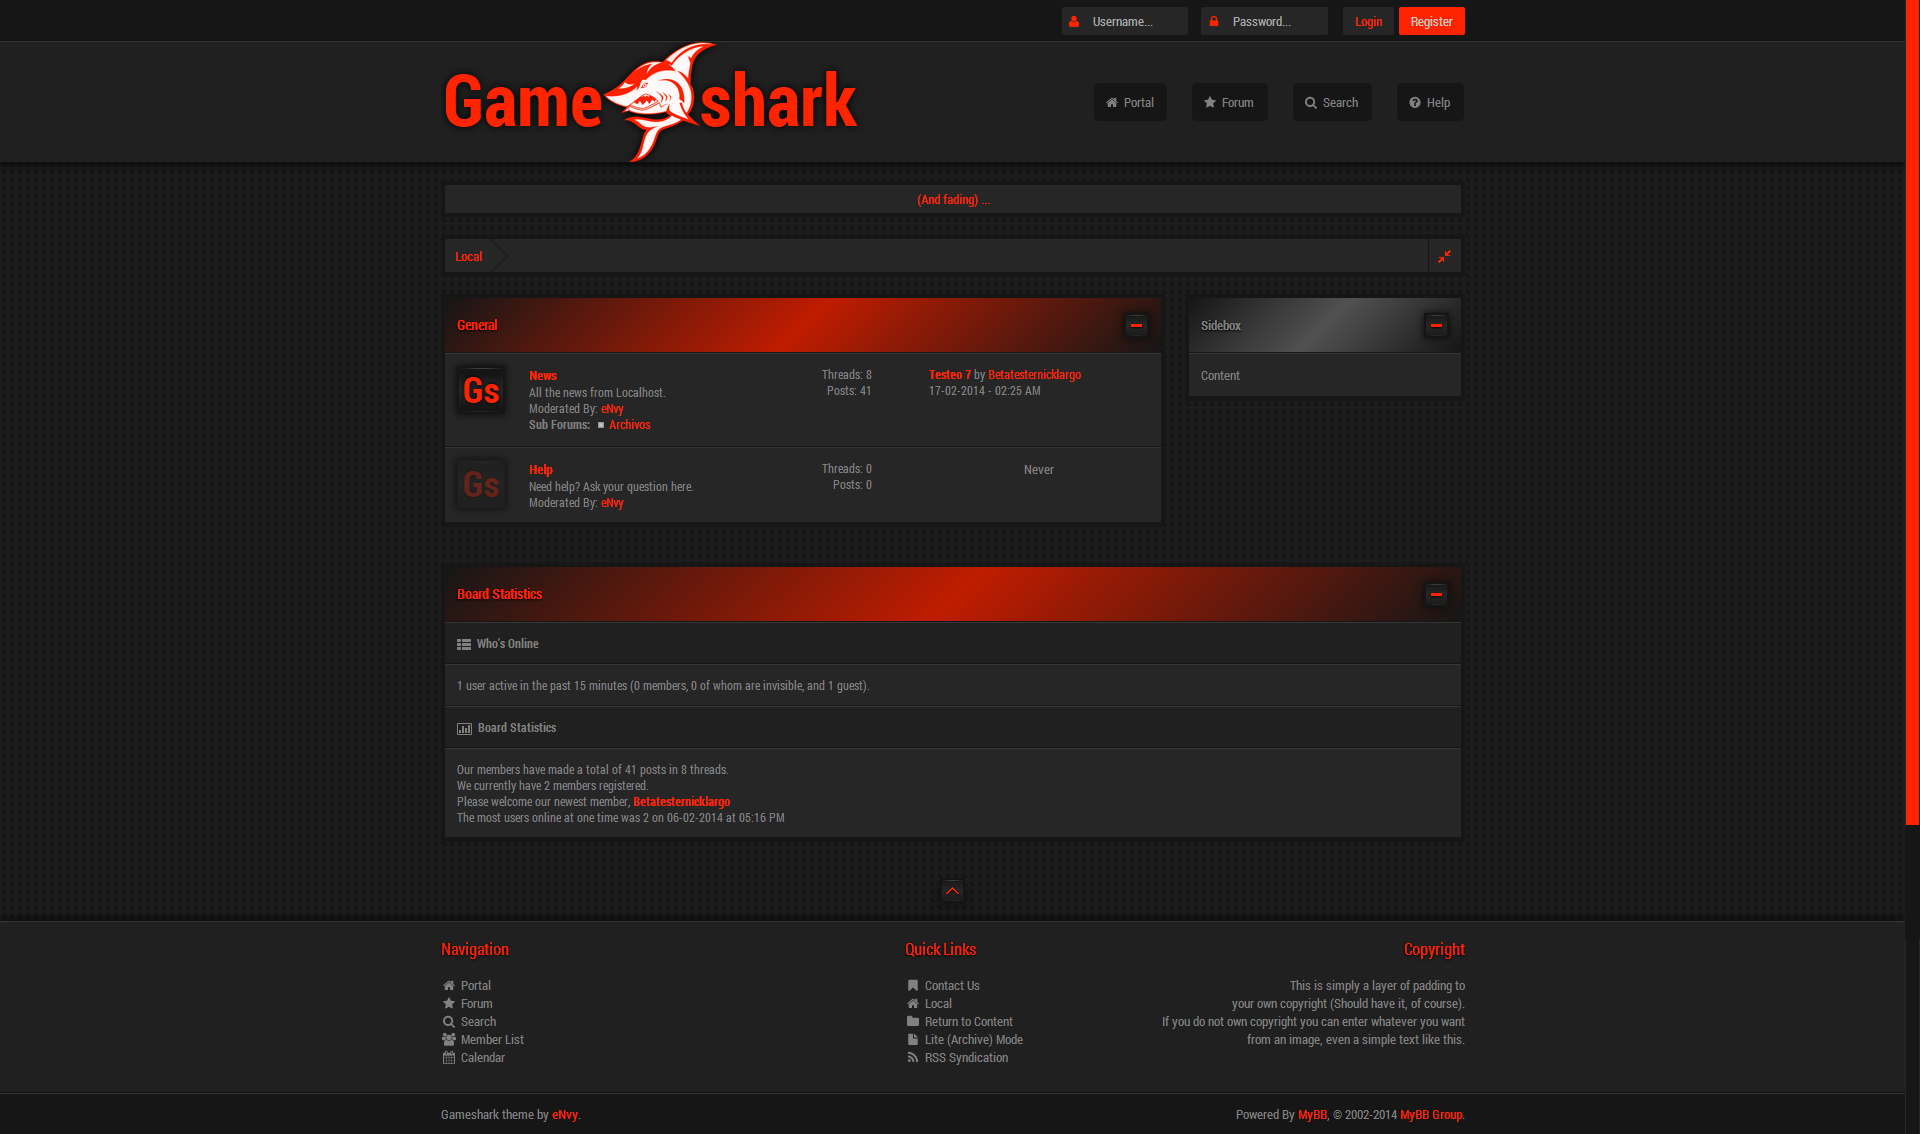 [Image: 75705-1393442125-GamesharkPreview.png]